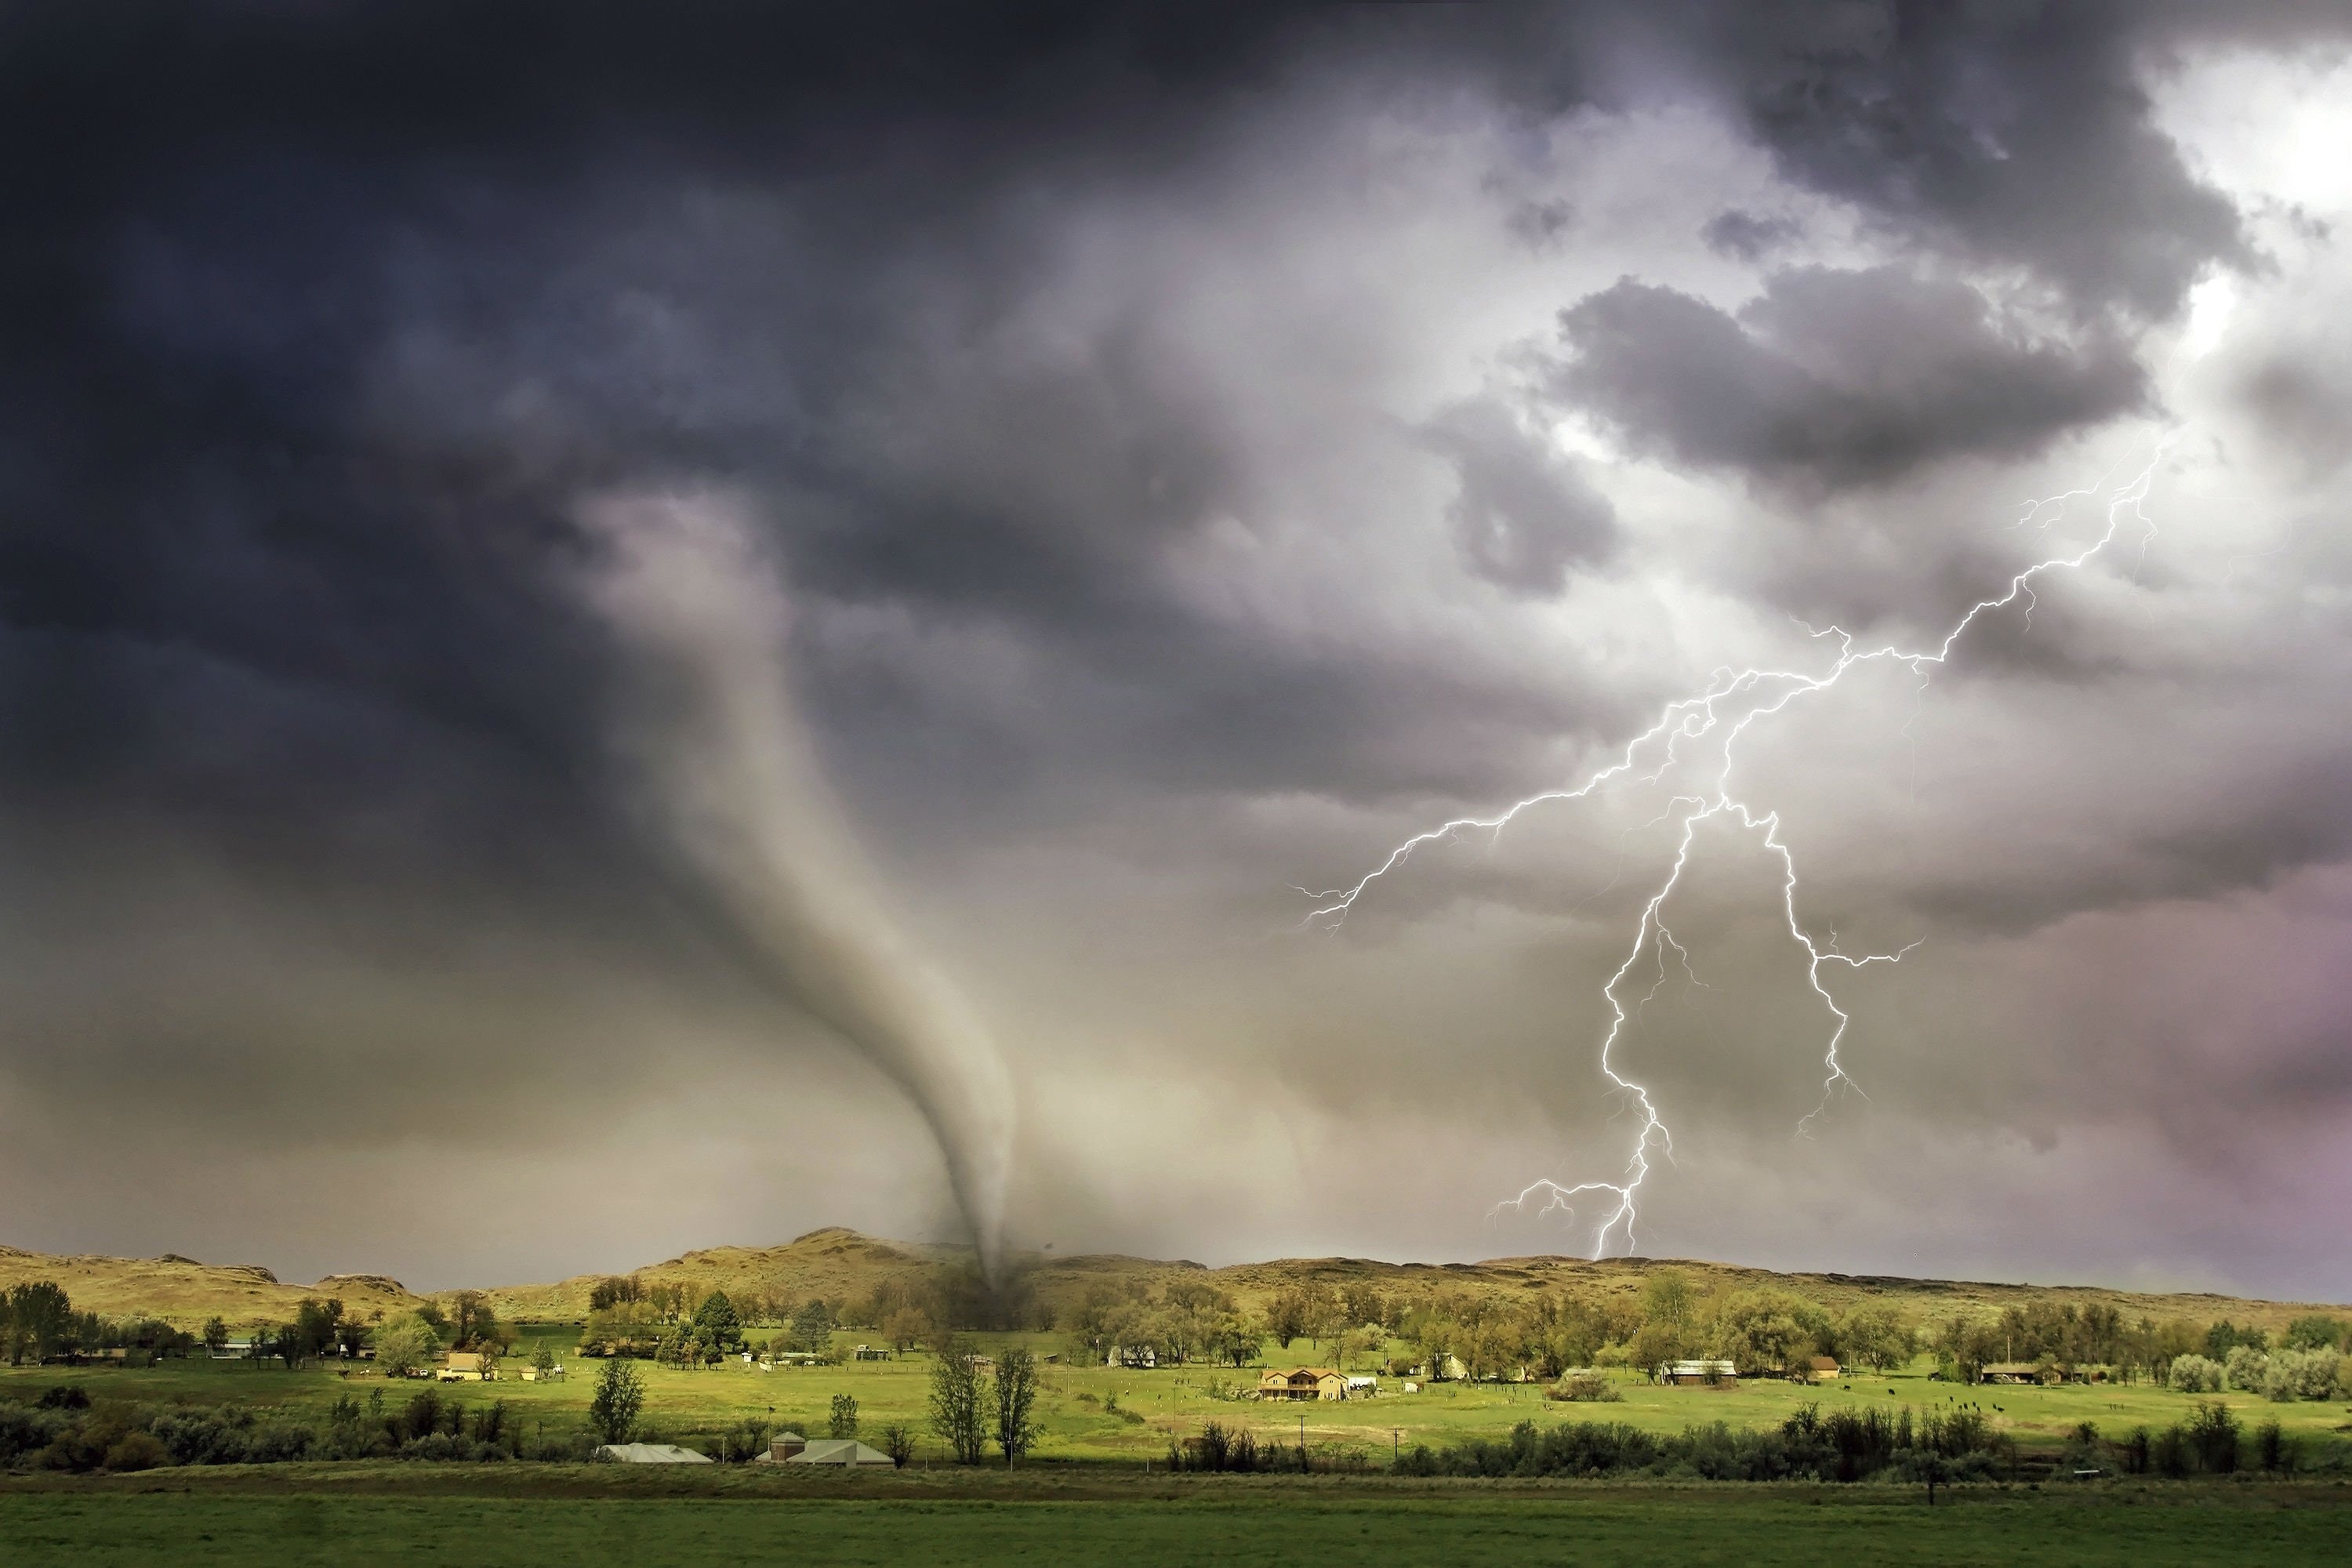 How you can stay prepared in times of severe weather